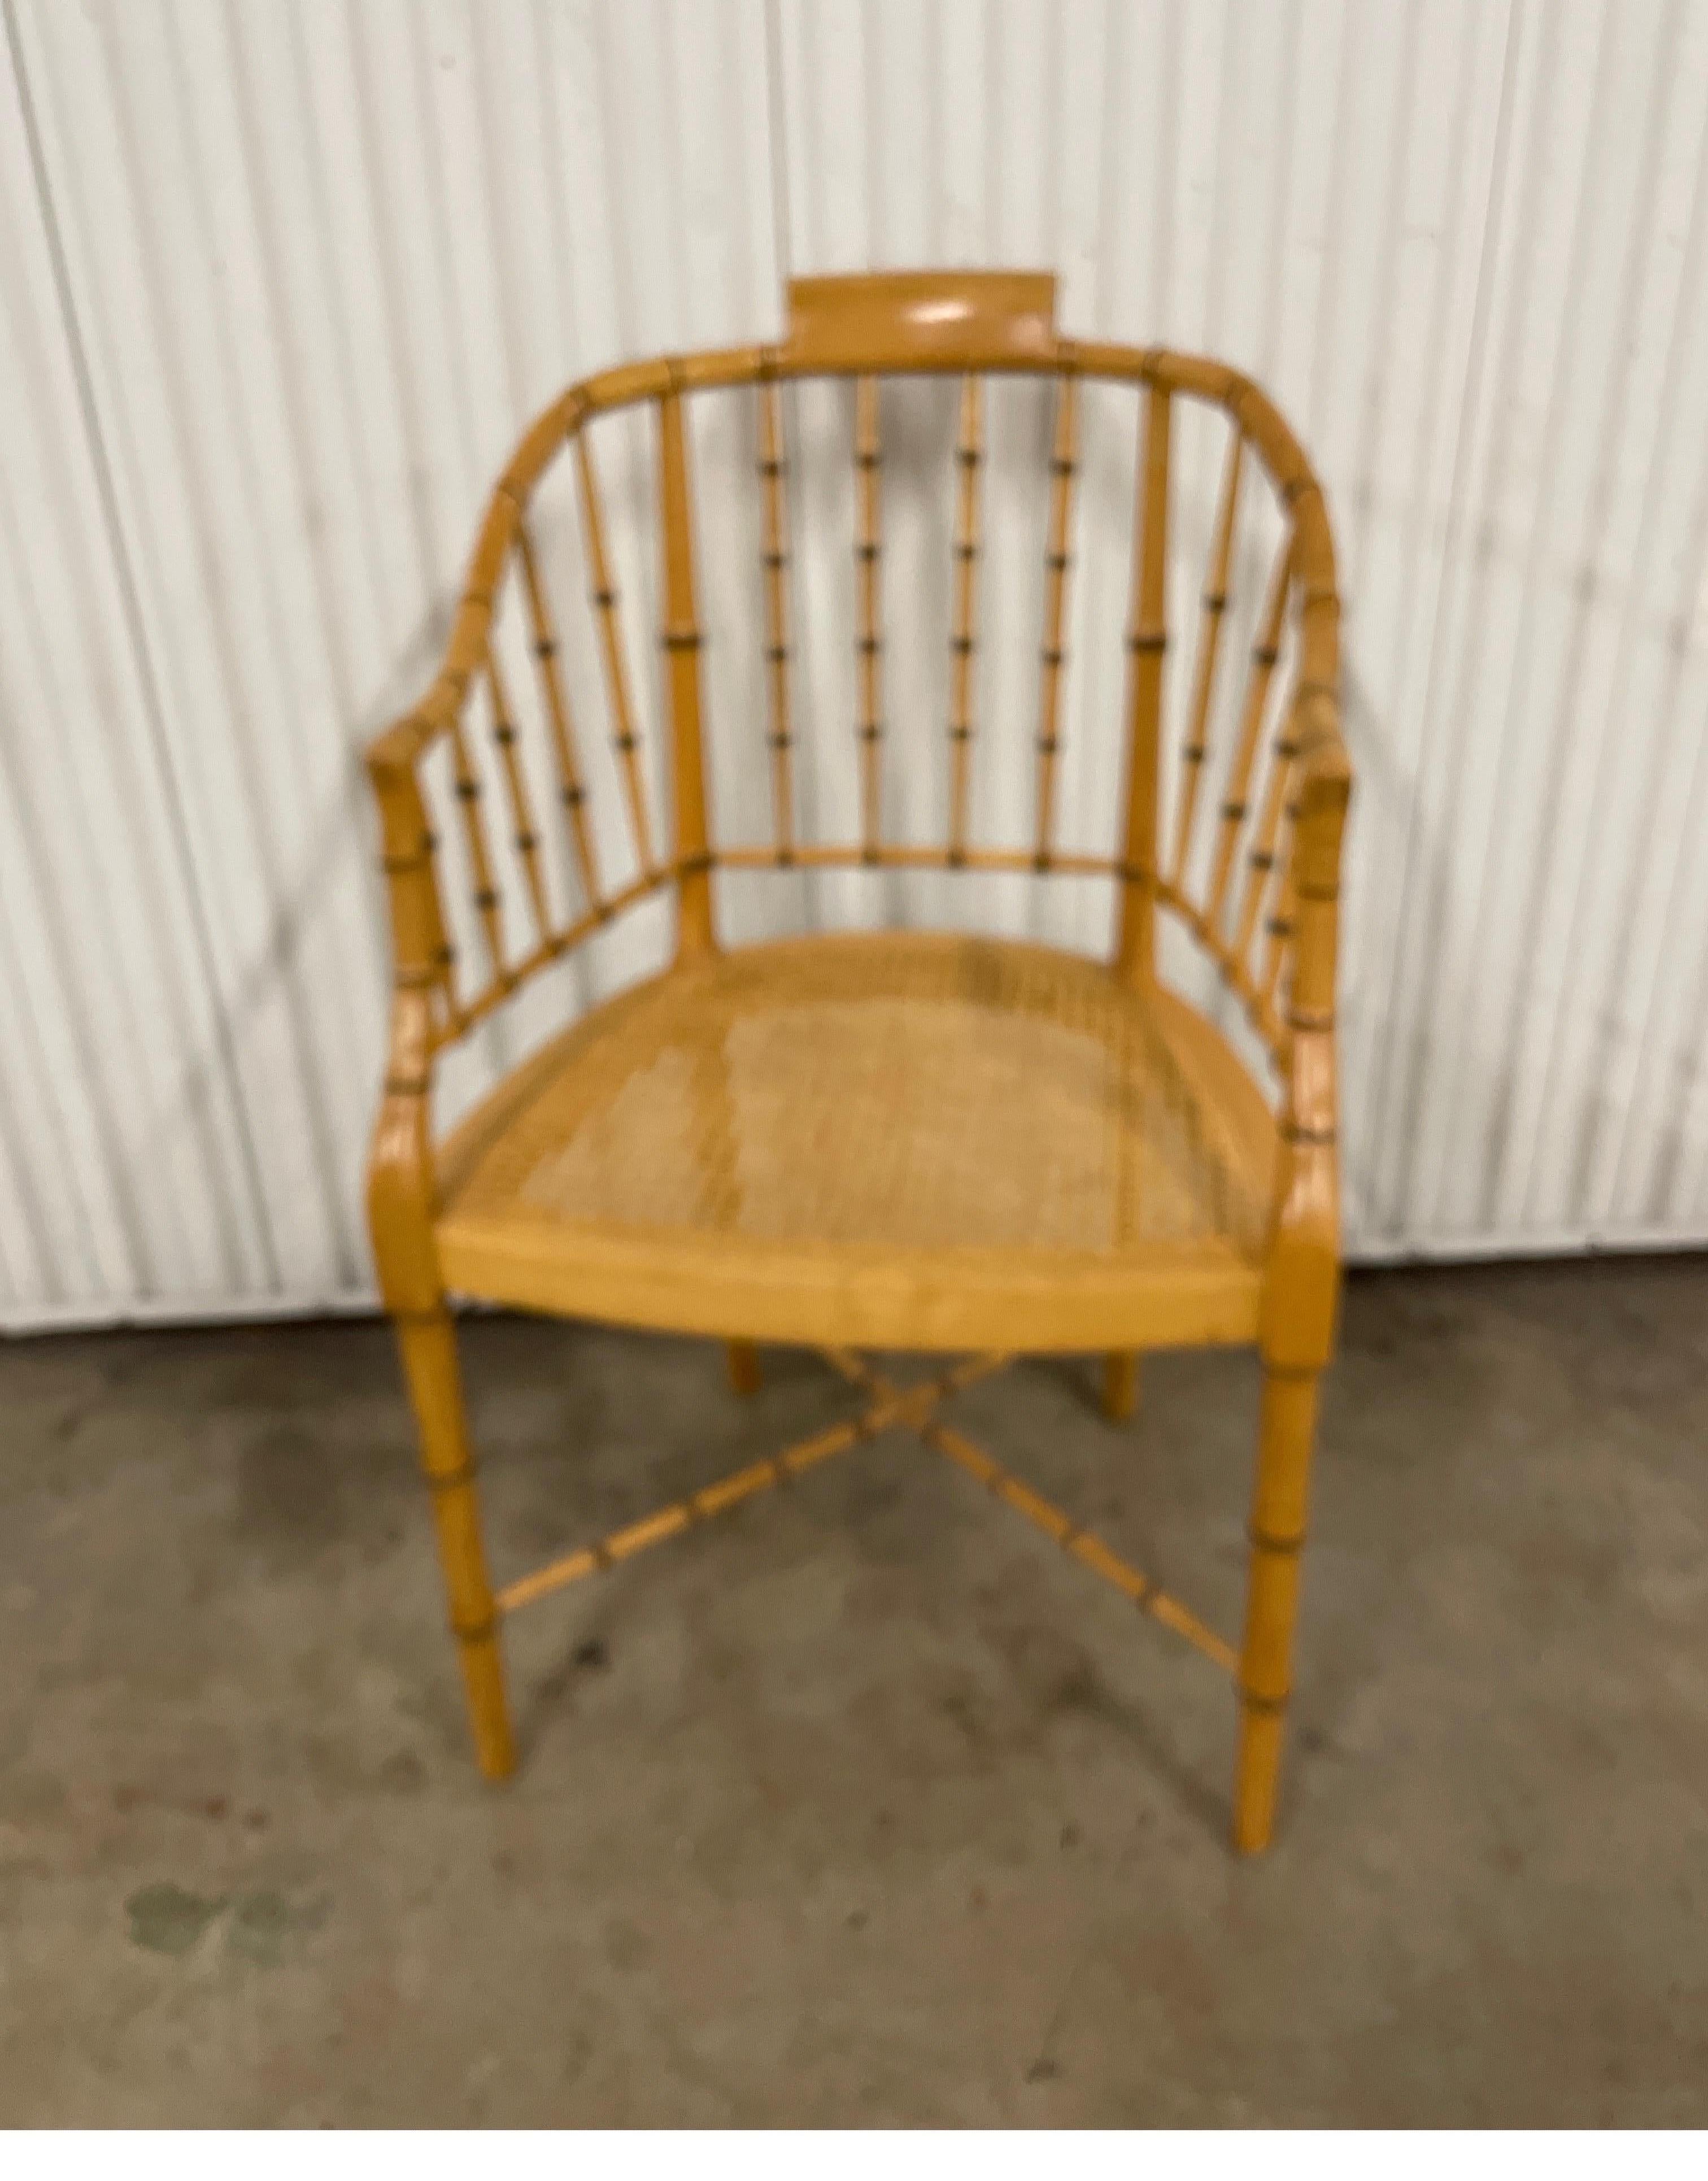 Vintage faux bamboo tub style armchair with cane seat. This circa 1960 armchair made by Baker furniture features a tub shaped back with curved arms & a cane seat. Legs are connected by an X form cross stretcher. This elegant blond finish chair will